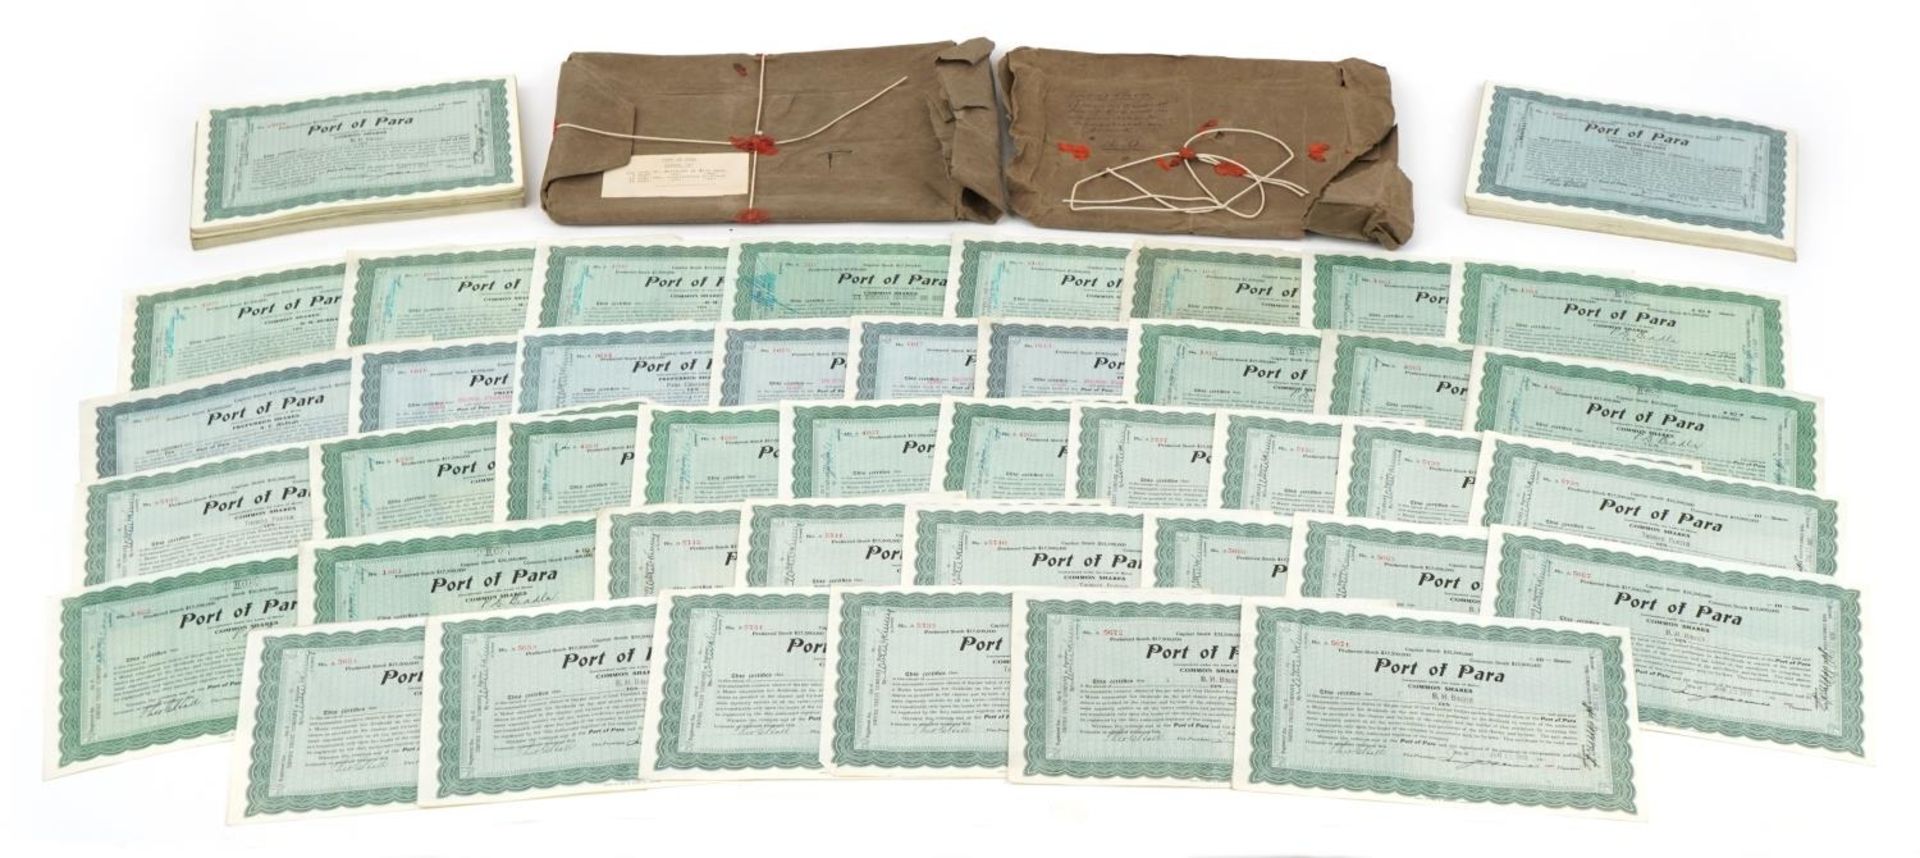 Extensive collection of early 20th century Port of Para share certificates : For further information